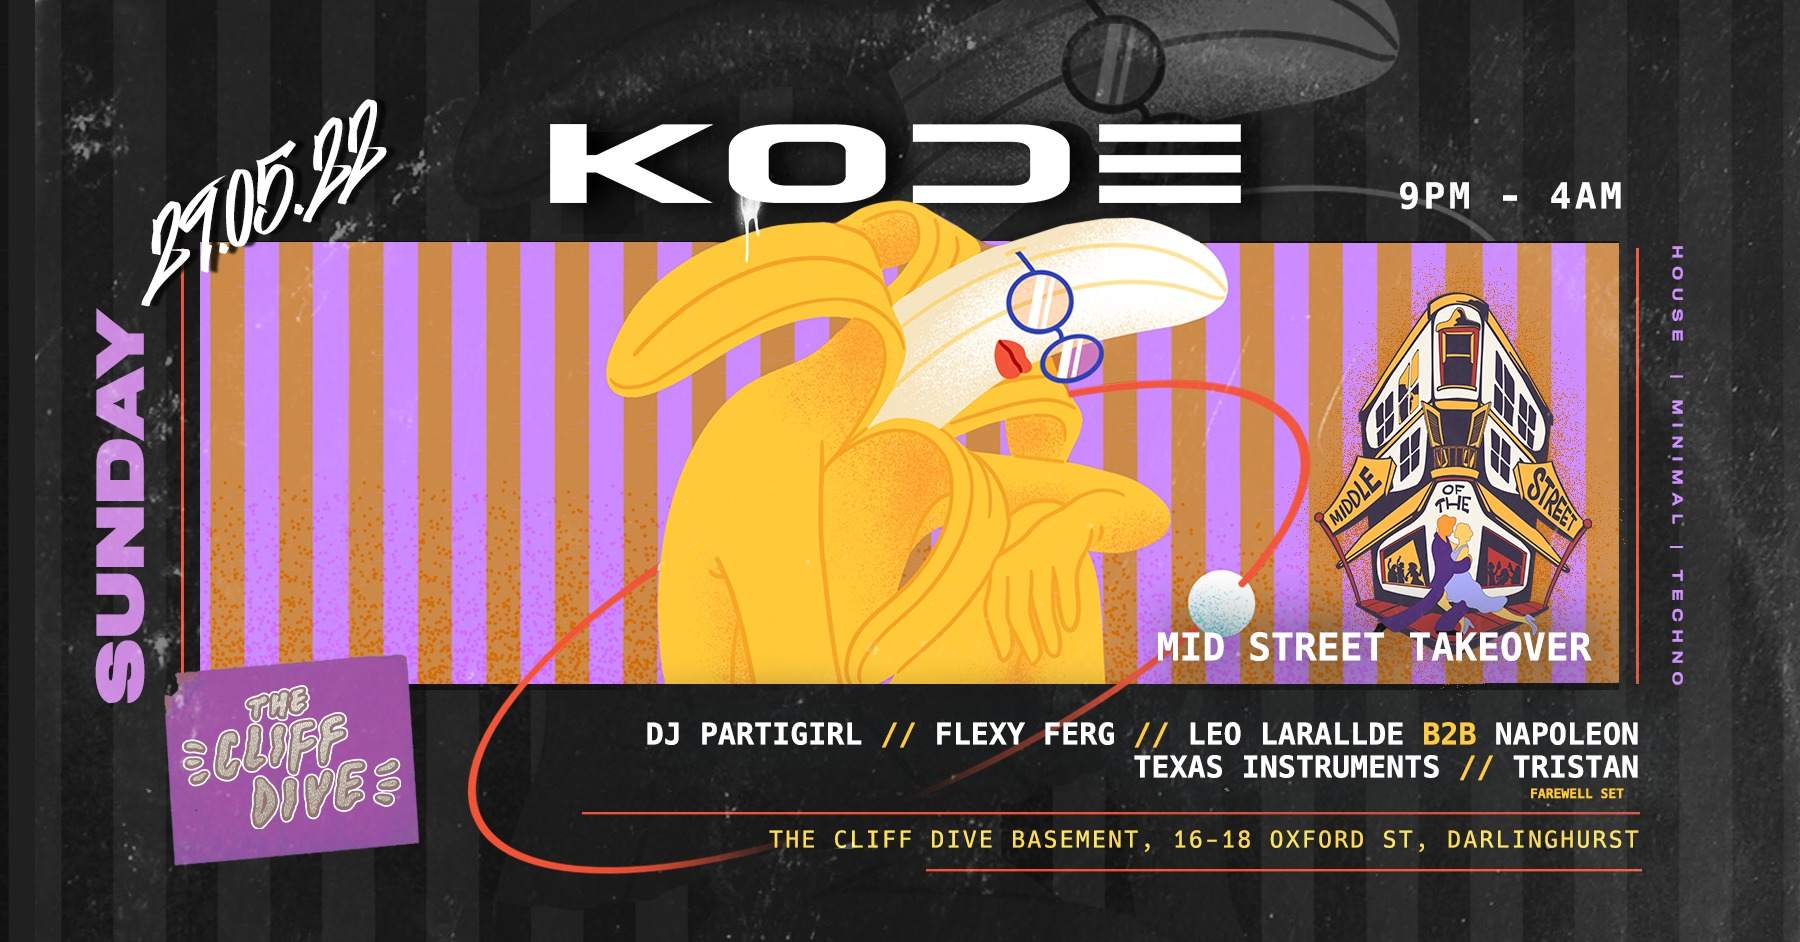 ▲▼ KODE #72 FT. MID STRET TAKEOVER ▲▼ - フライヤー表